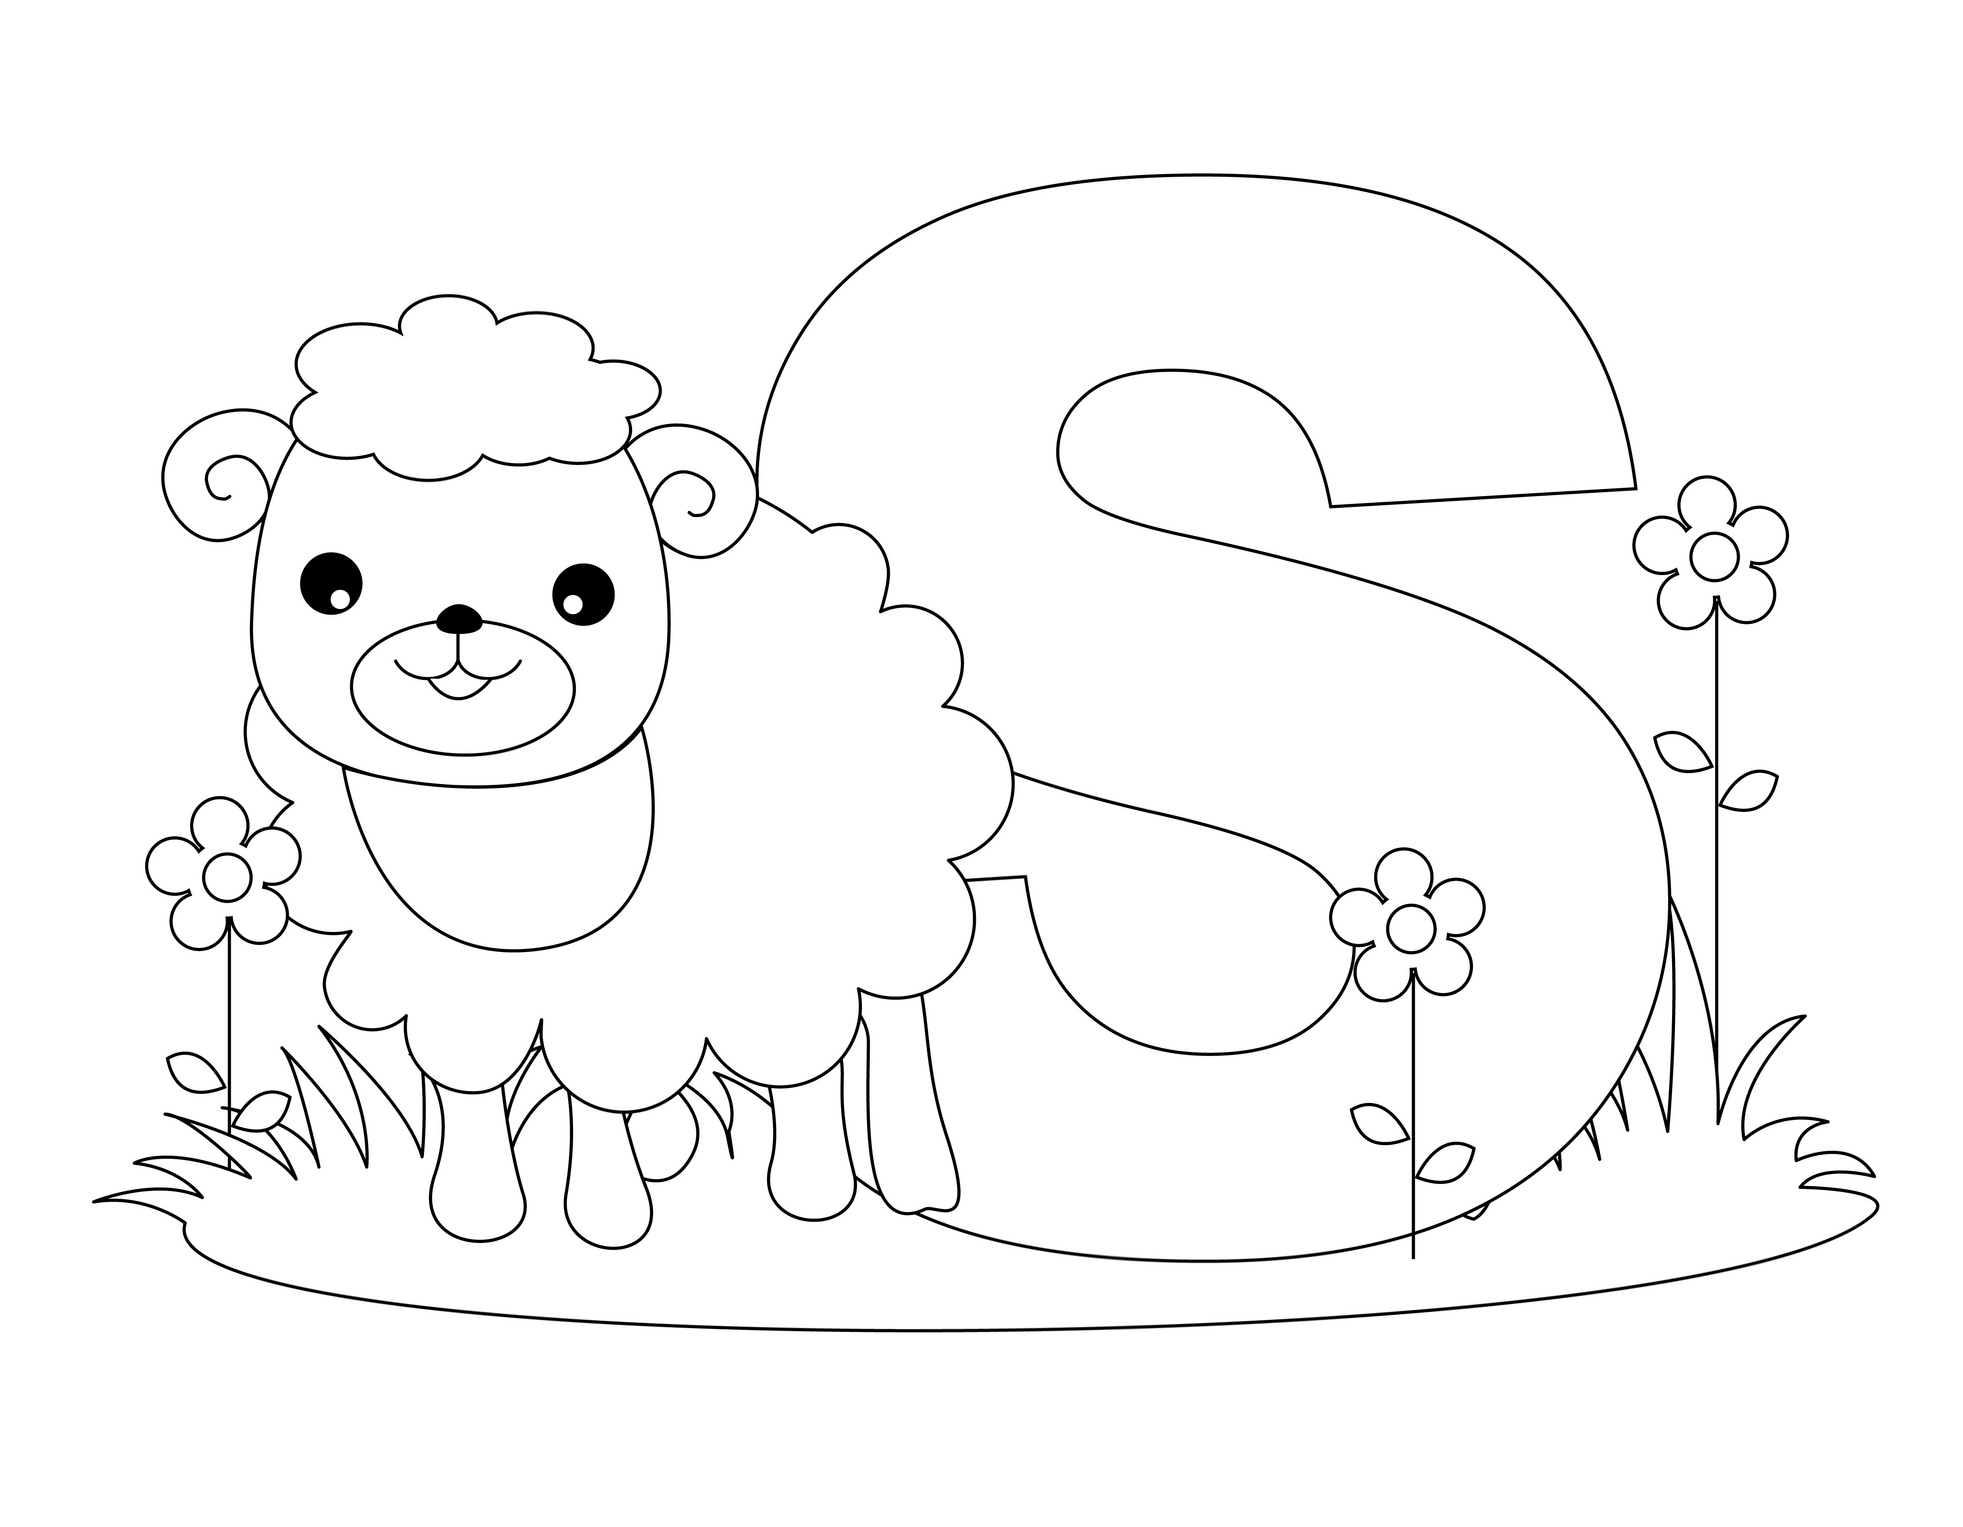 Coloring page: Alphabet (Educational) #125048 - Free Printable Coloring Pages